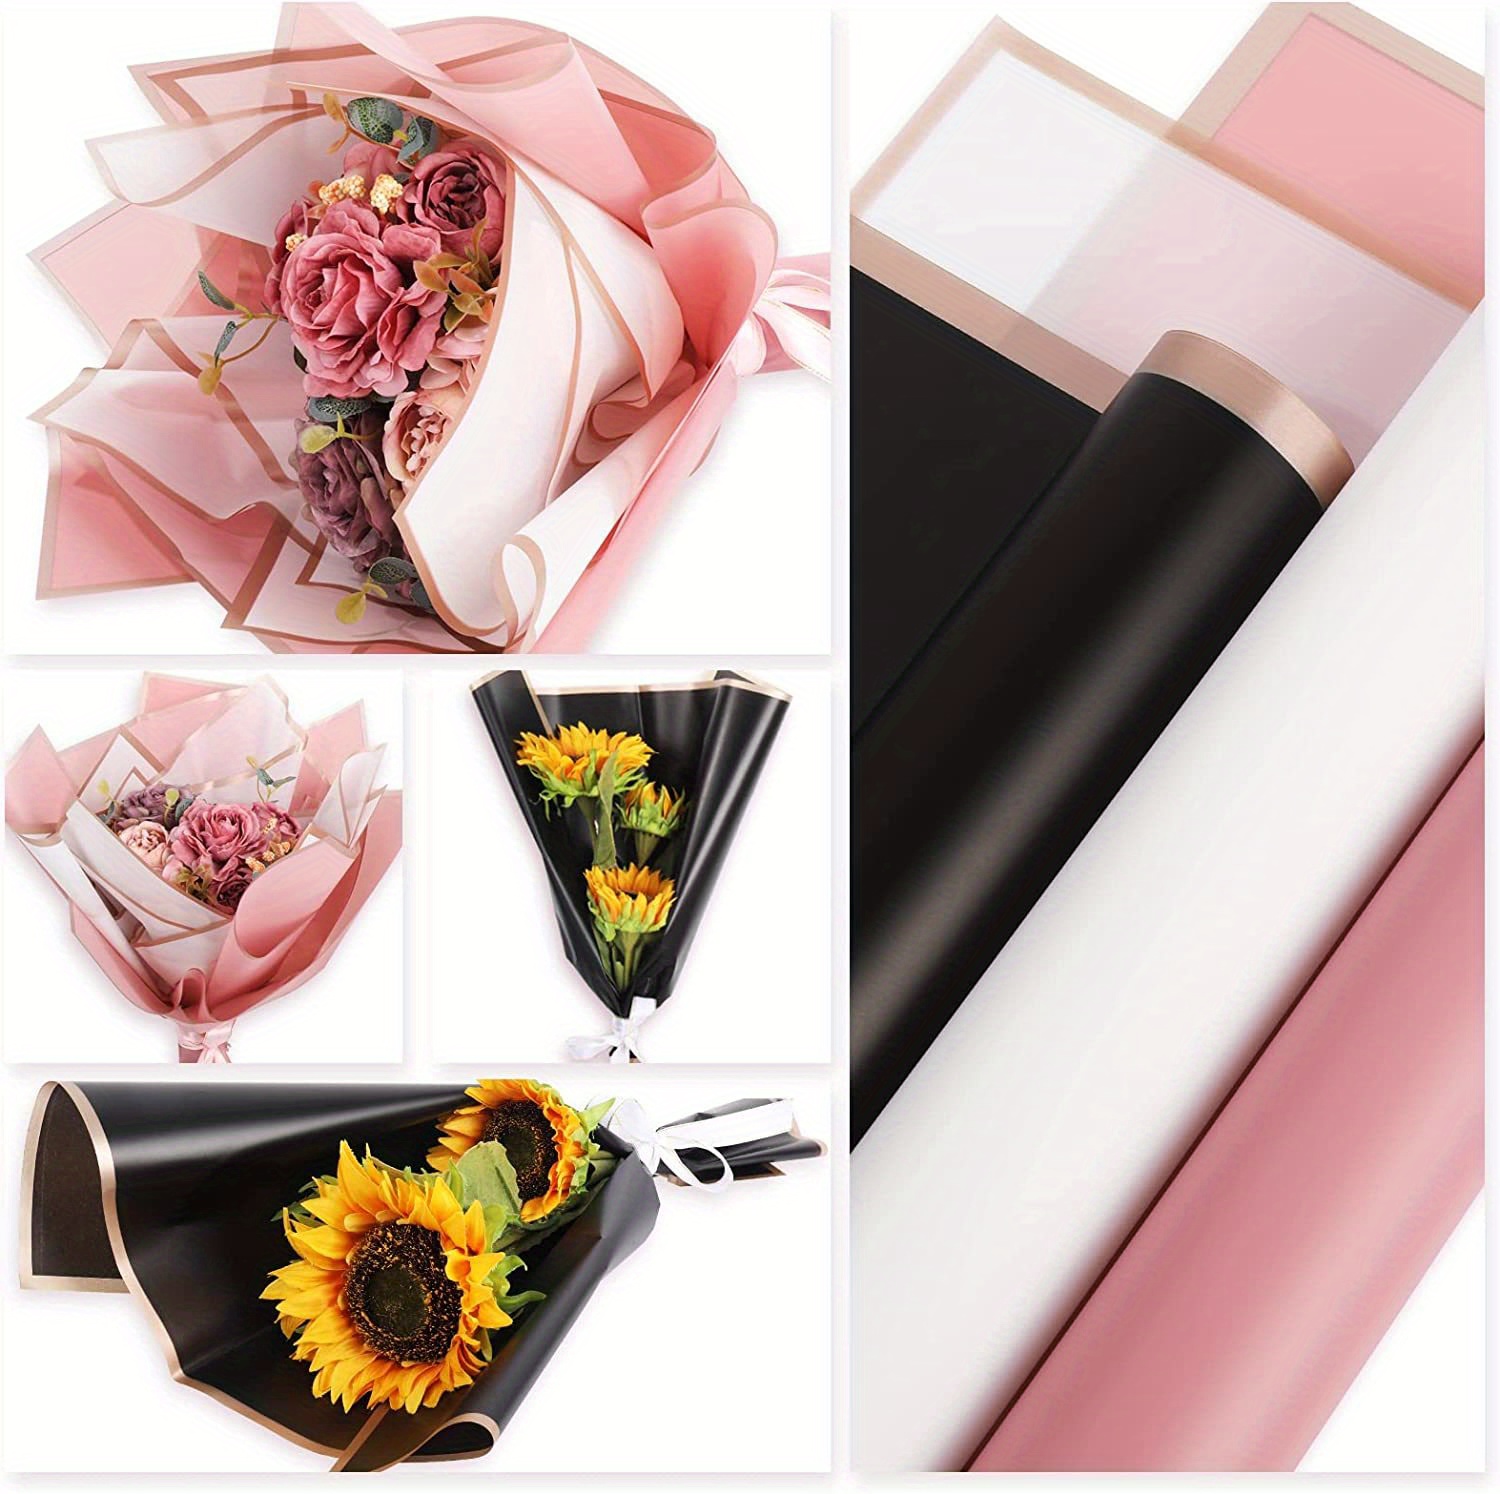  CURTEK 40 Sheets Pink Edge Flower Wrapping Paper 23 x 23 Inch  Waterproof Transparent Valentine's Day Bouquet Wrapping Paper Florist  Bouquet Supplies,for Gift Packaging Bouquet Packaging : Health & Household